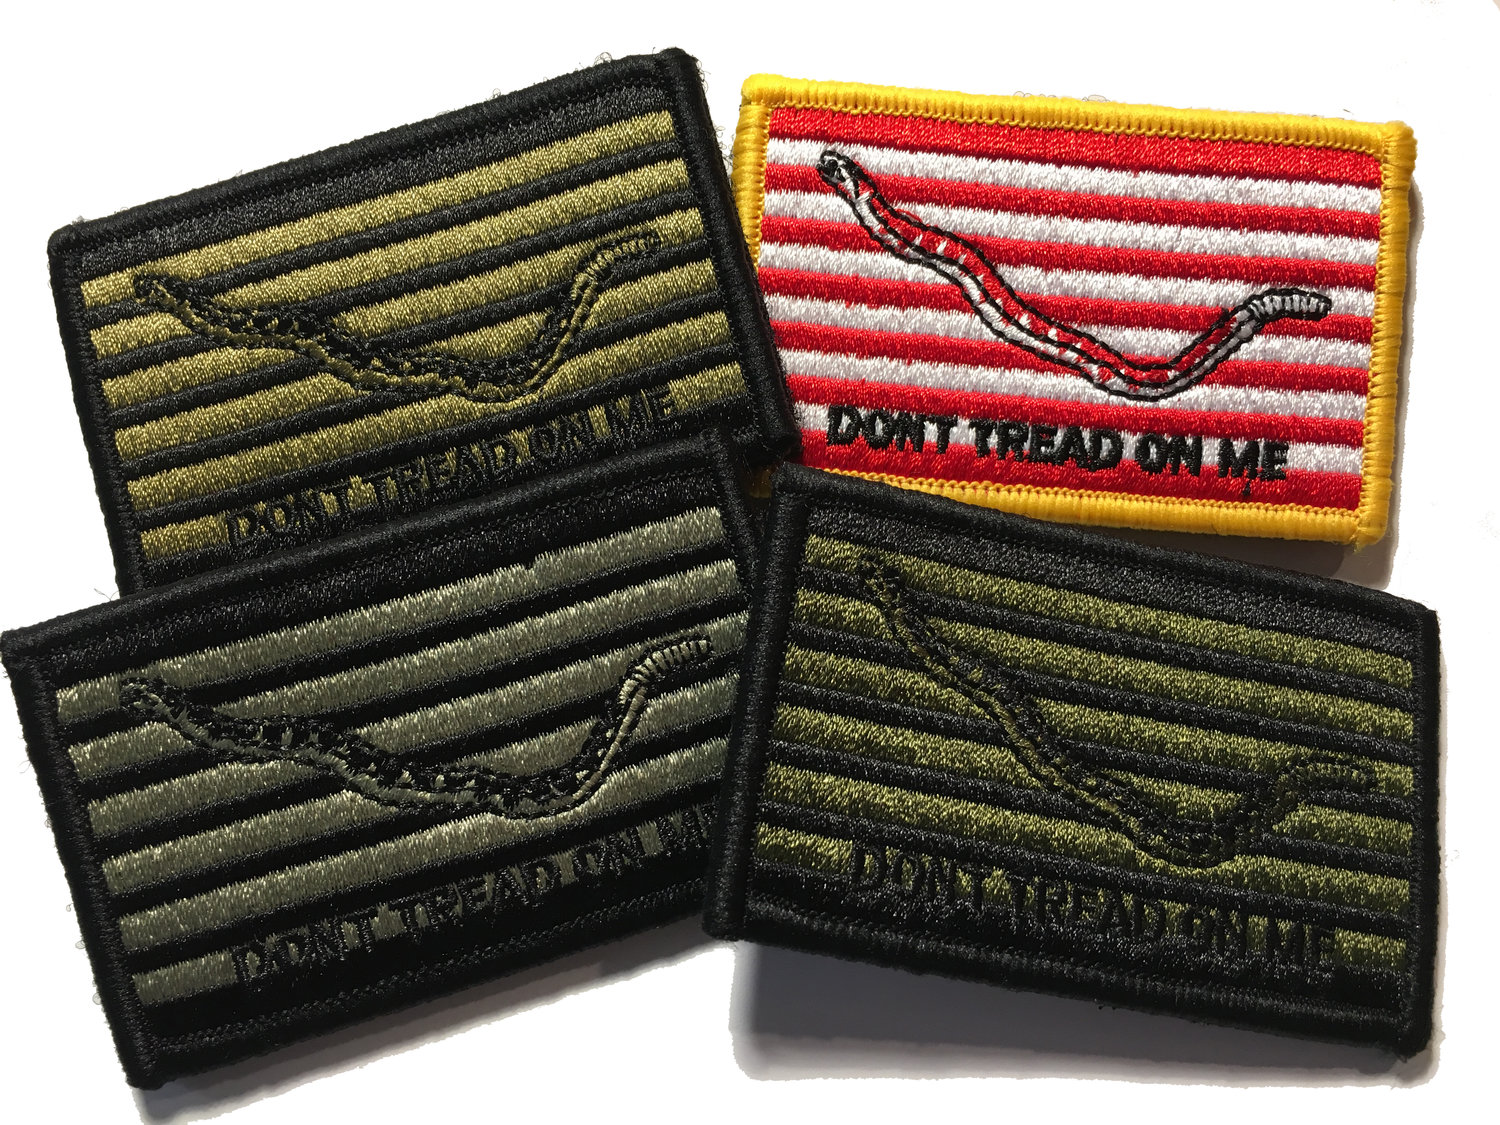 Don't Tread Patch - Full Color